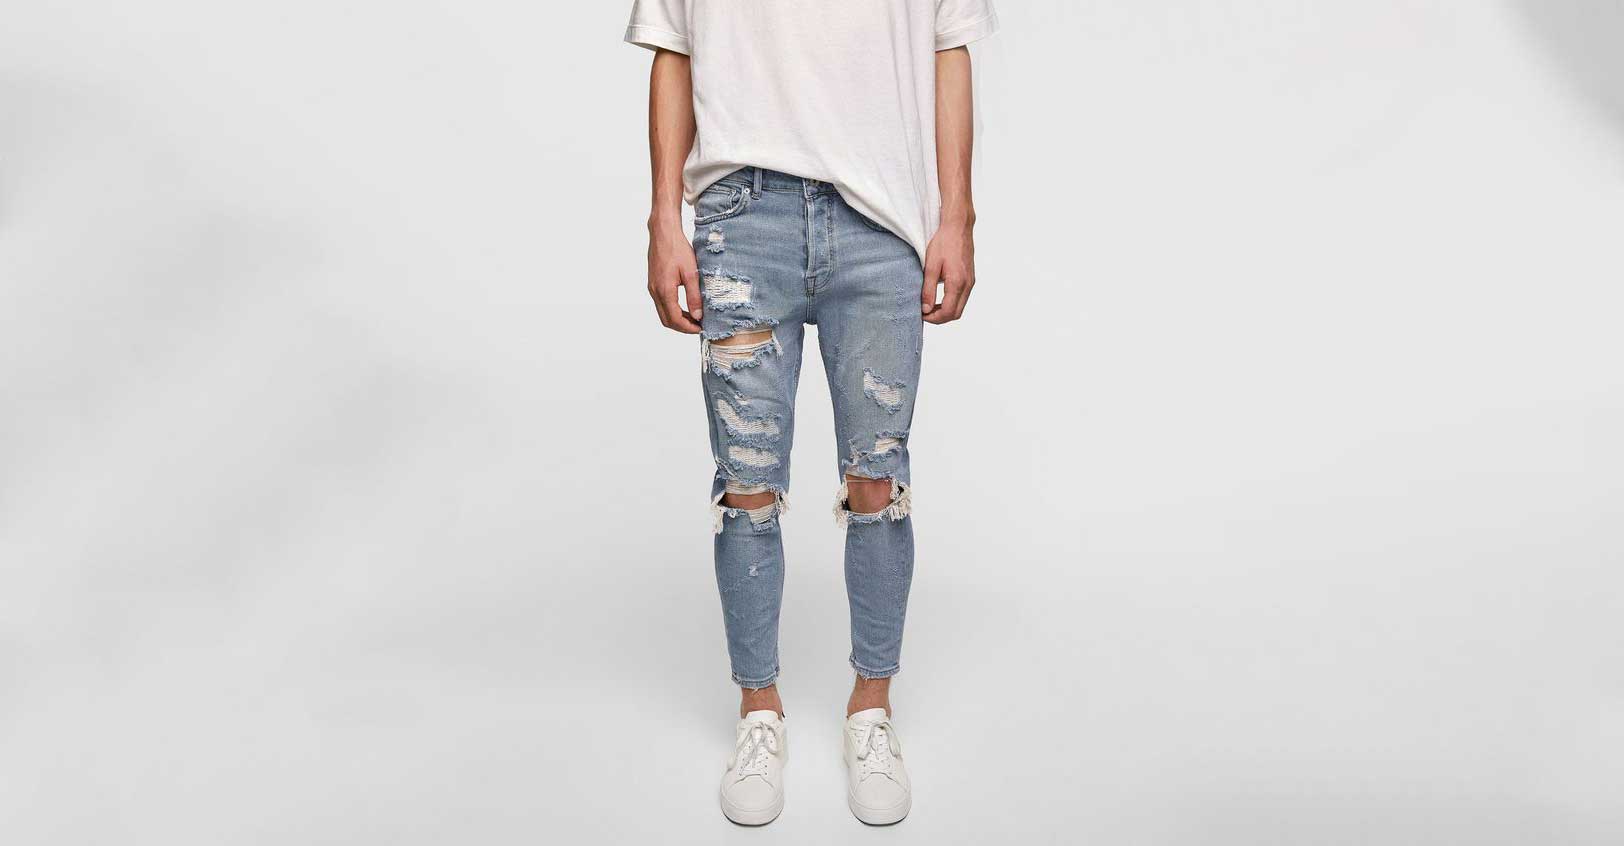 The-Hottest-Ripped-Jeans-for-Men-to-Impress-Your-Date-